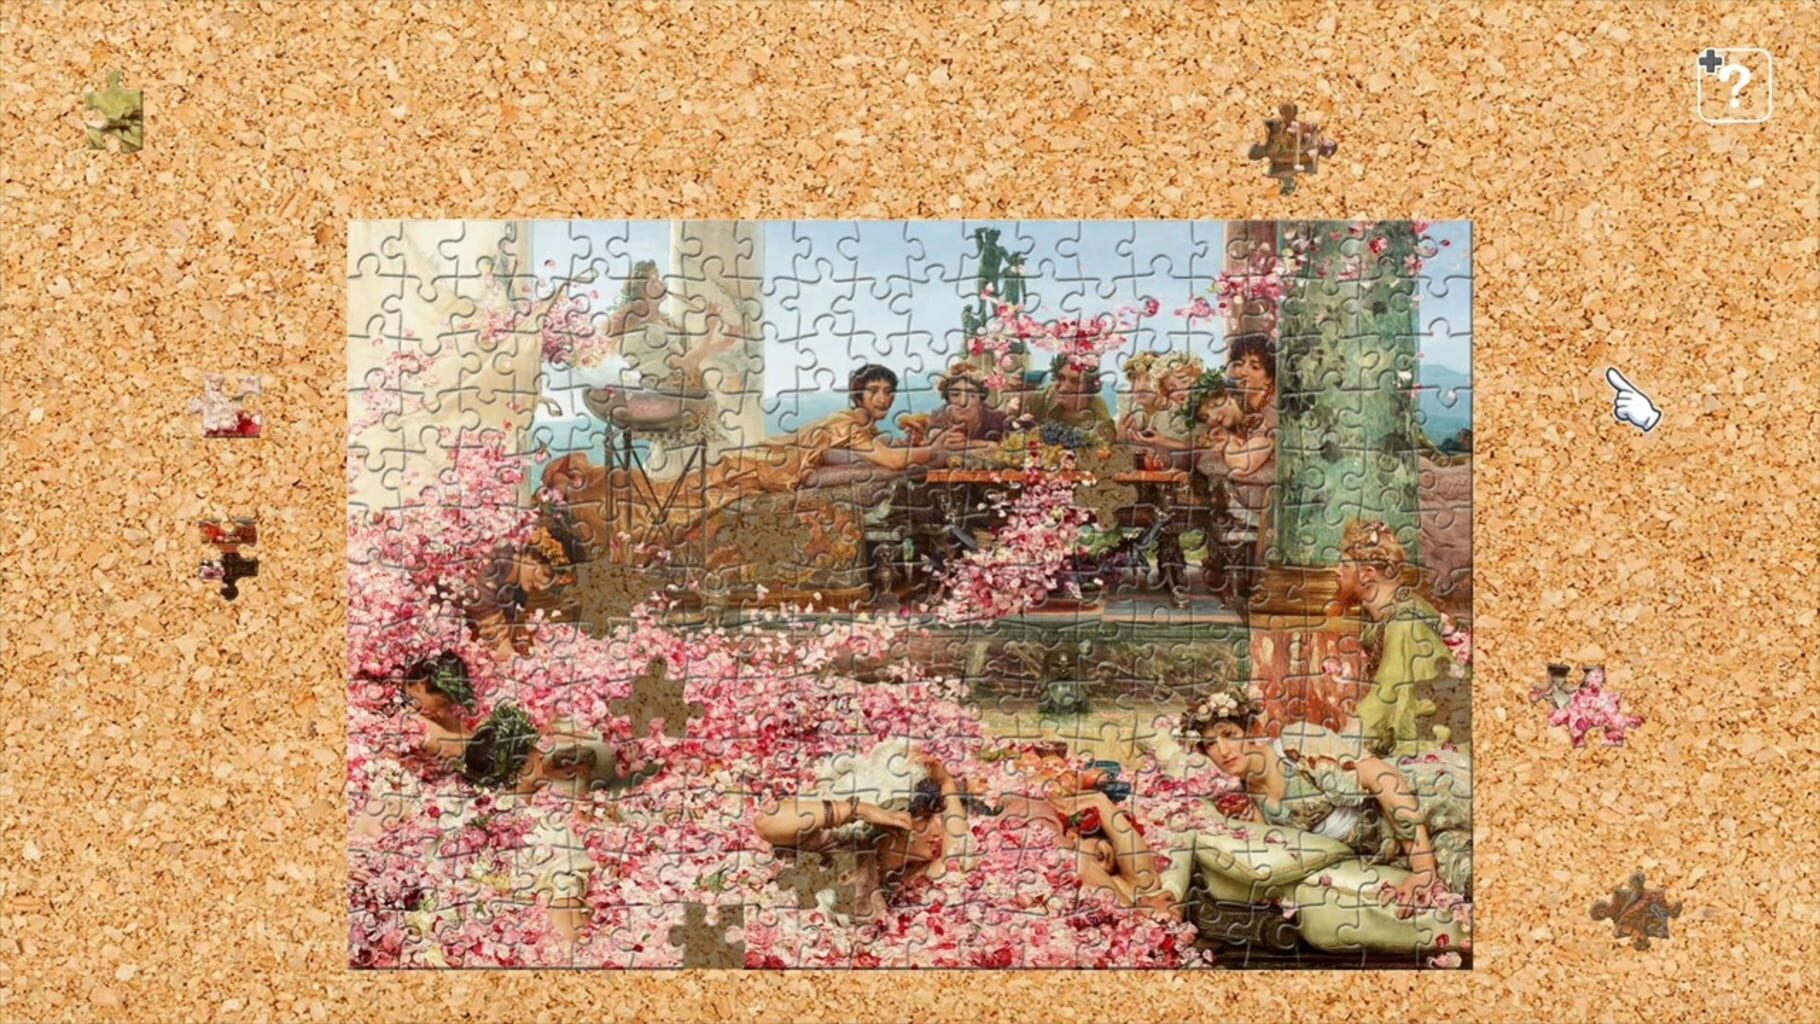 Jigsaw Masterpieces: Masterpieces of World - Brimming with Flowers screenshot